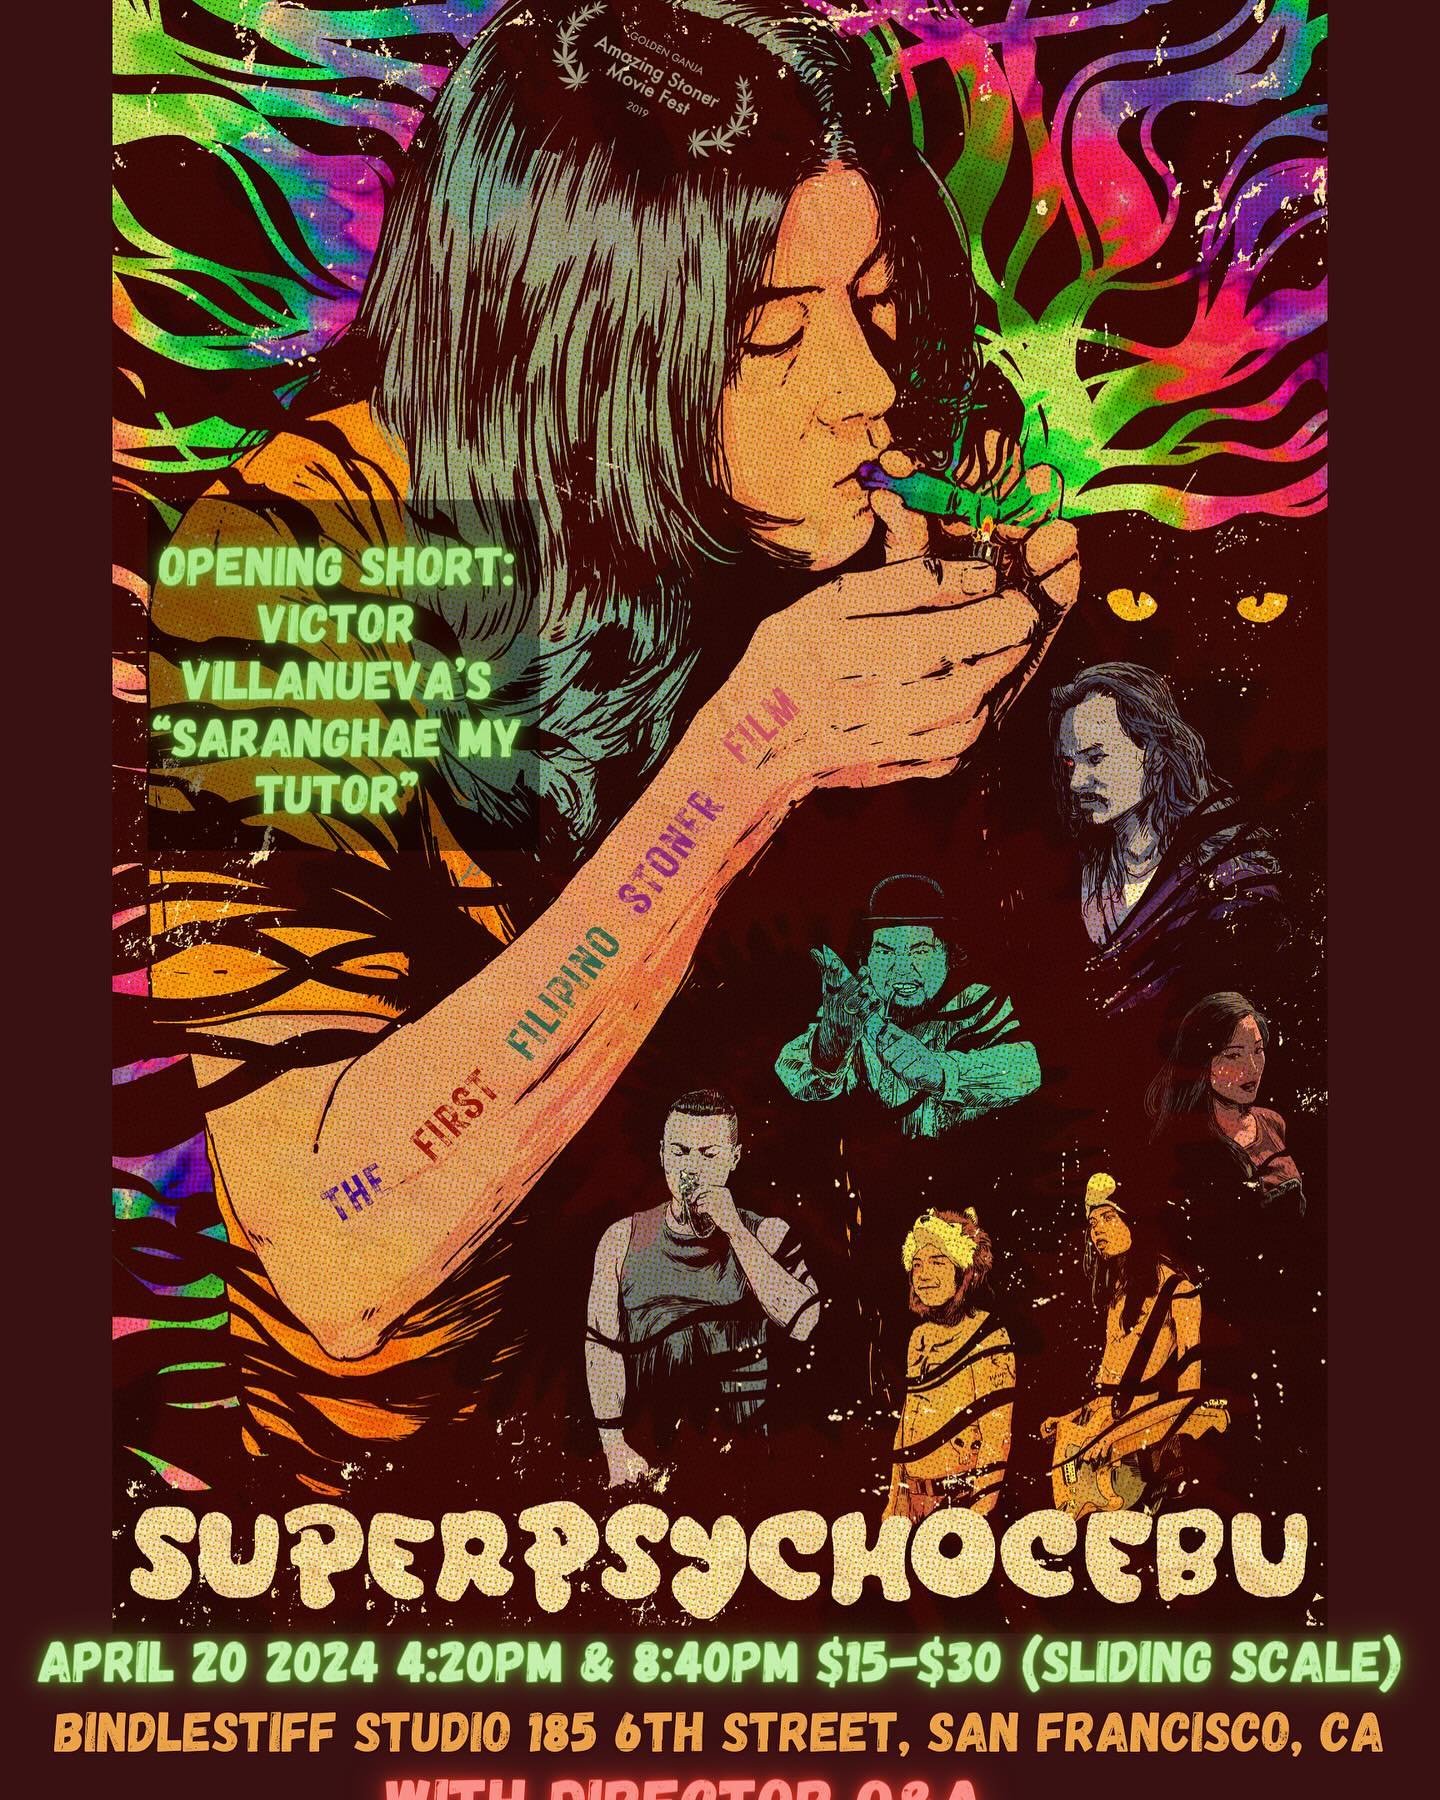 Roll thru 420 for the exciting San Francisco premiere of the Cebuano cult classic stoner film SUPERPSYCHOCEBU!

Film screening + Director Q&amp;A&mdash;
April 20 
4:20pm and 8:40pm at Bindlestiff Studio

$15&ndash;30
Tickets : link in bio for advance